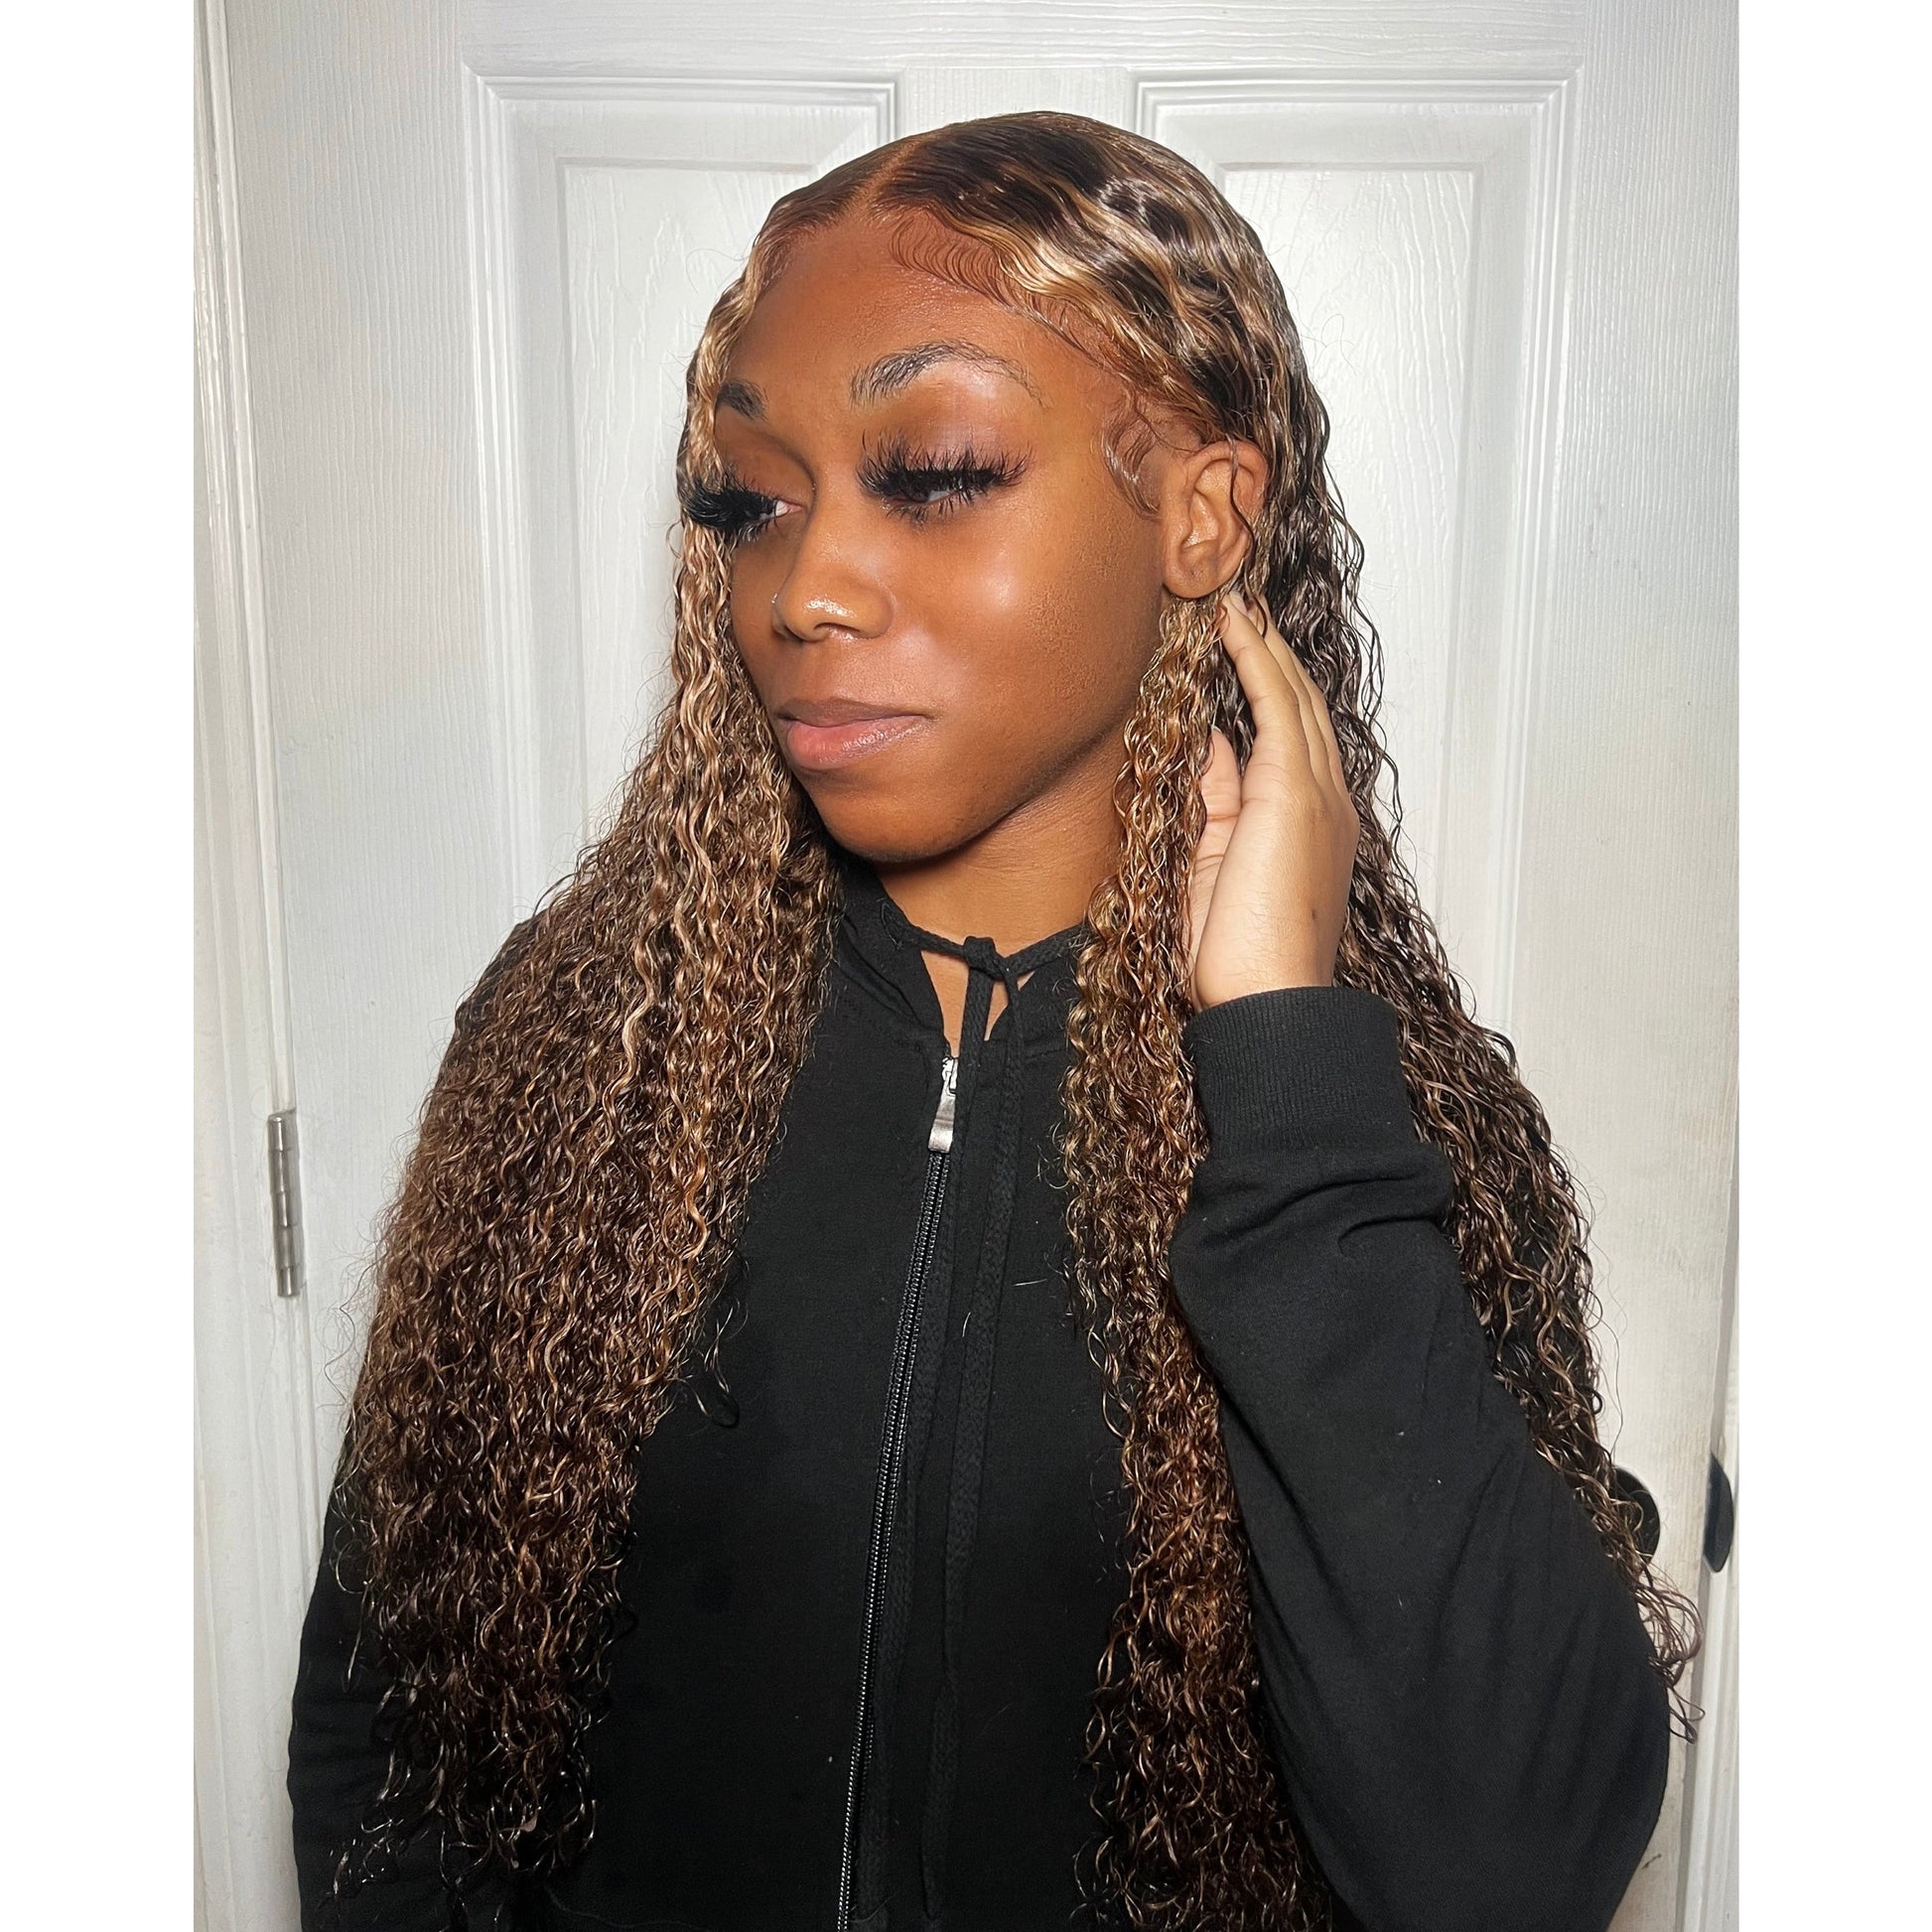 MAMI Exotic Curly HD Front Wig - Queen's Kloset